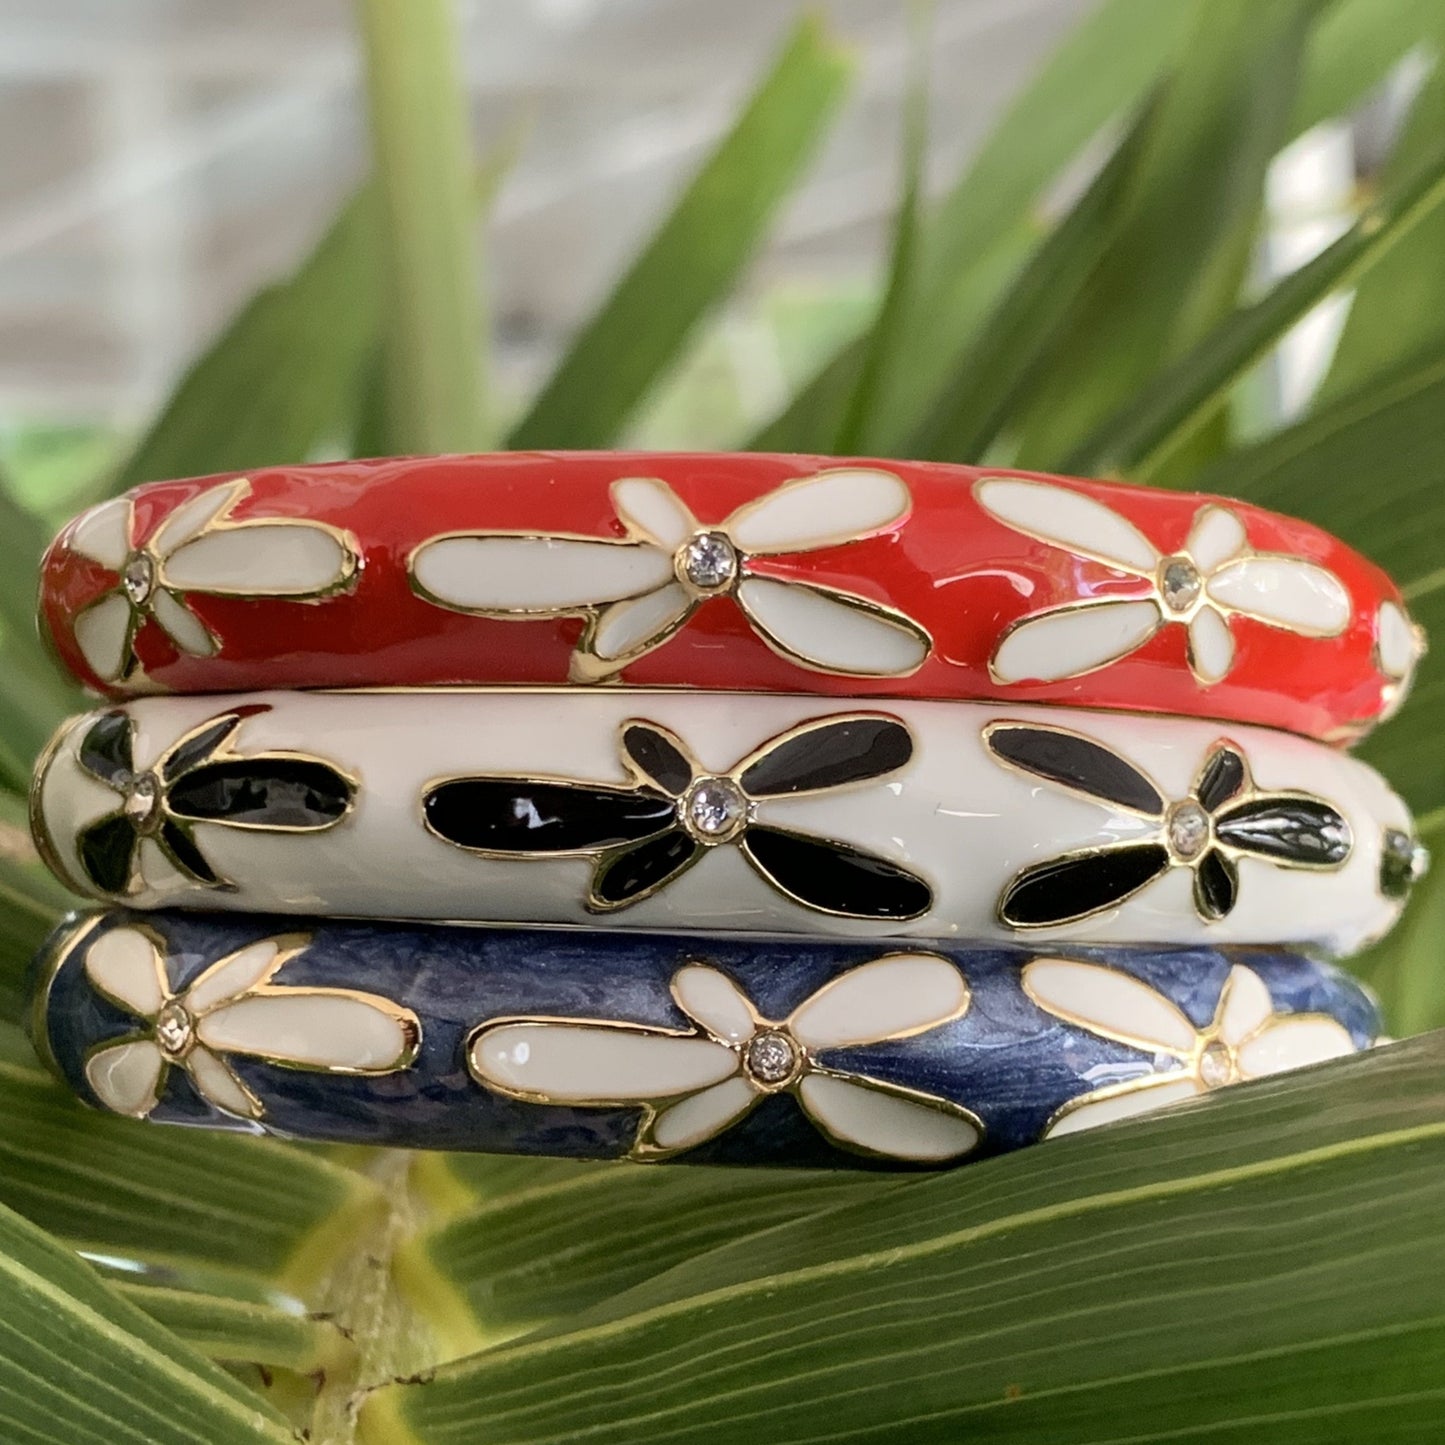 Plumeria Bracelet with Cubic Zirconia showing red, white and blue colors.